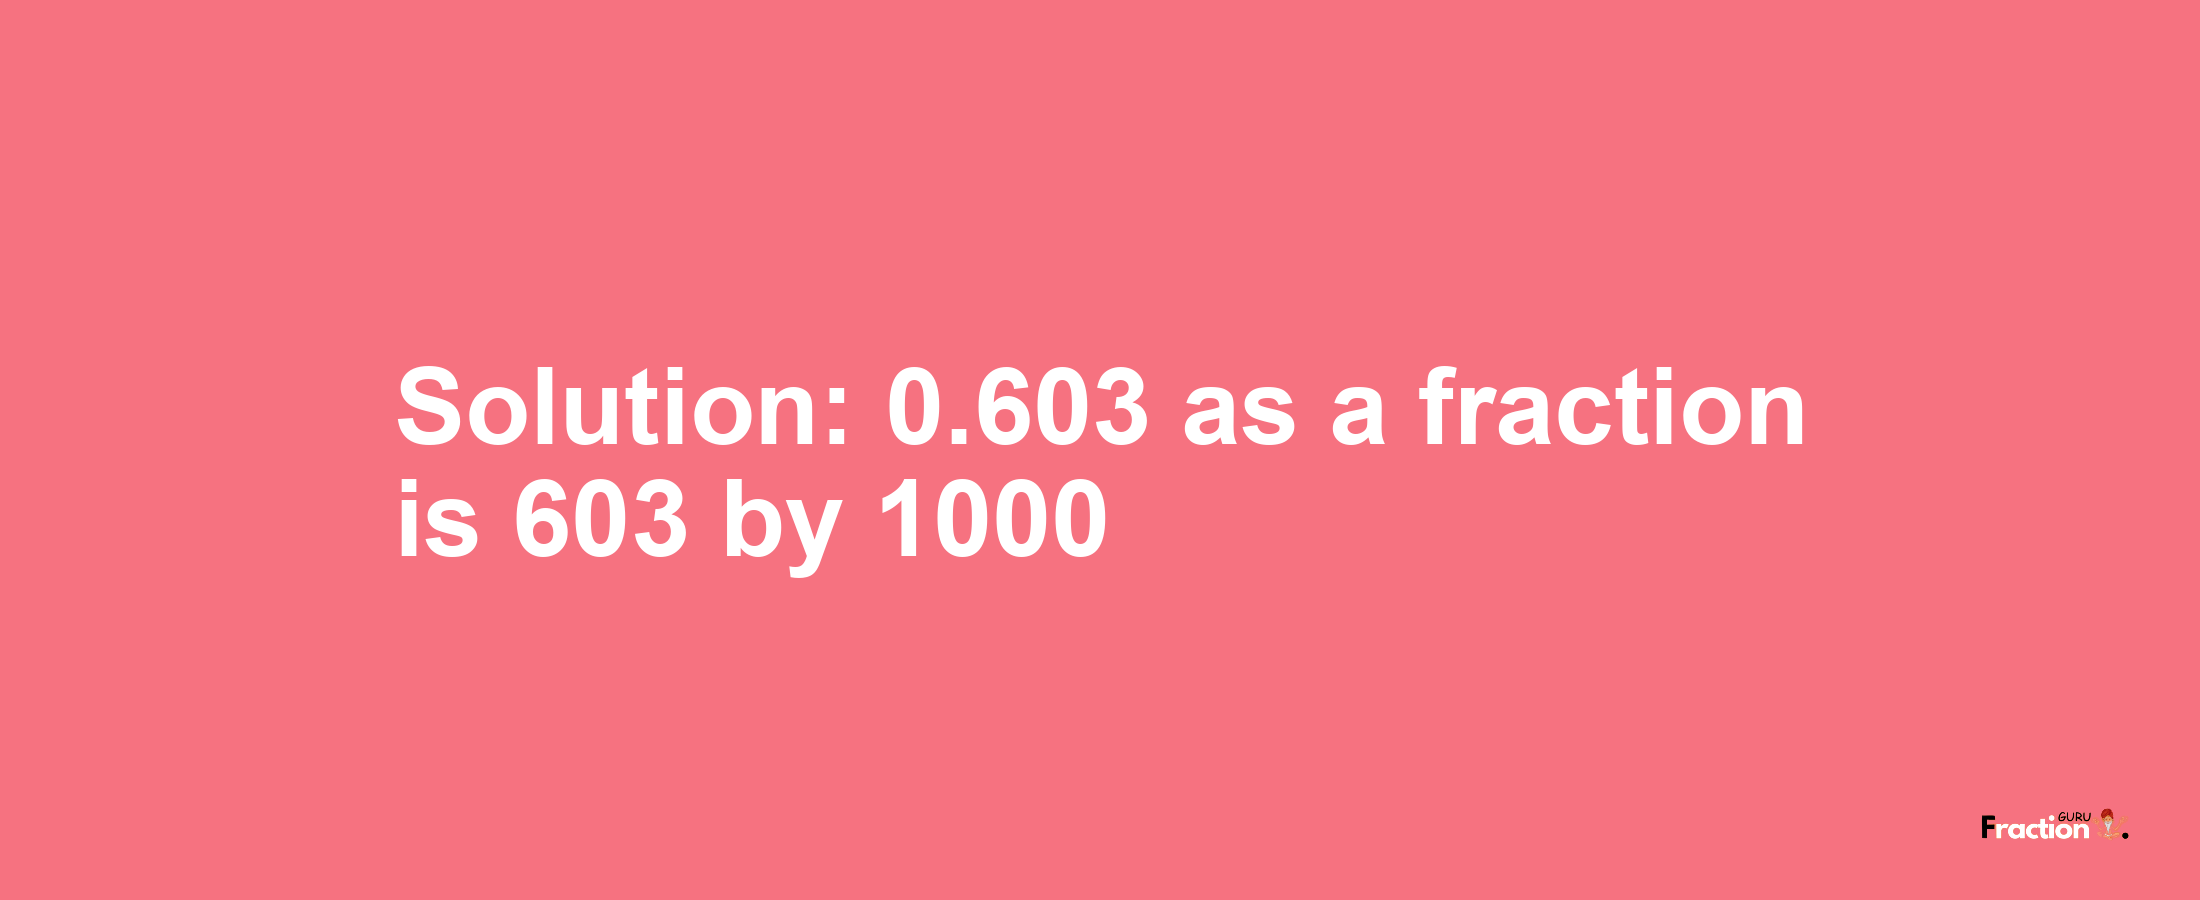 Solution:0.603 as a fraction is 603/1000